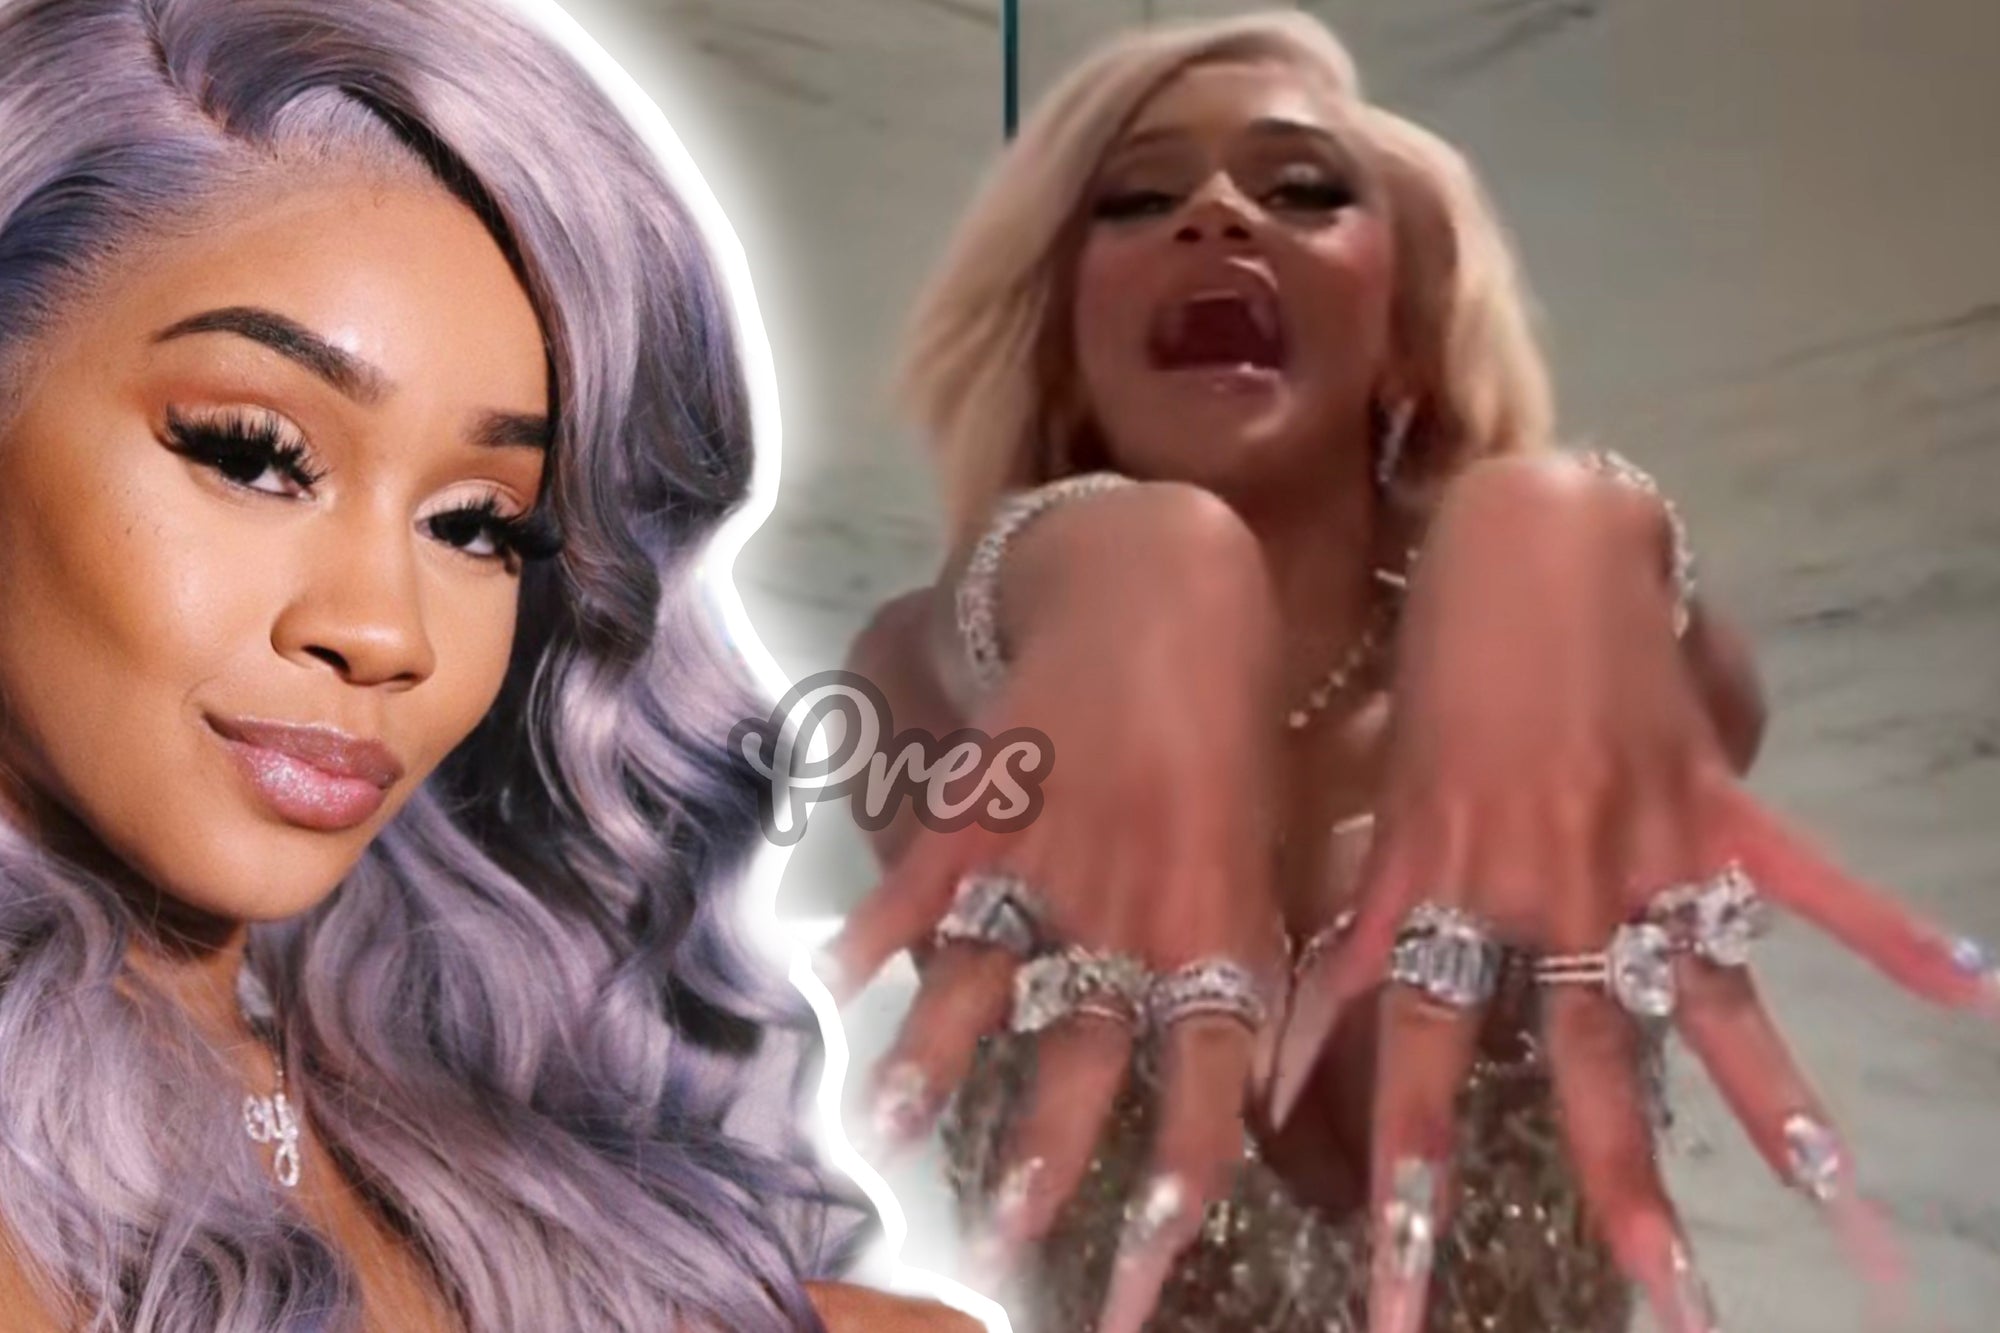 Saweetie Shows Off $25 Million Worth of Jewelry at Oscars Afterparty